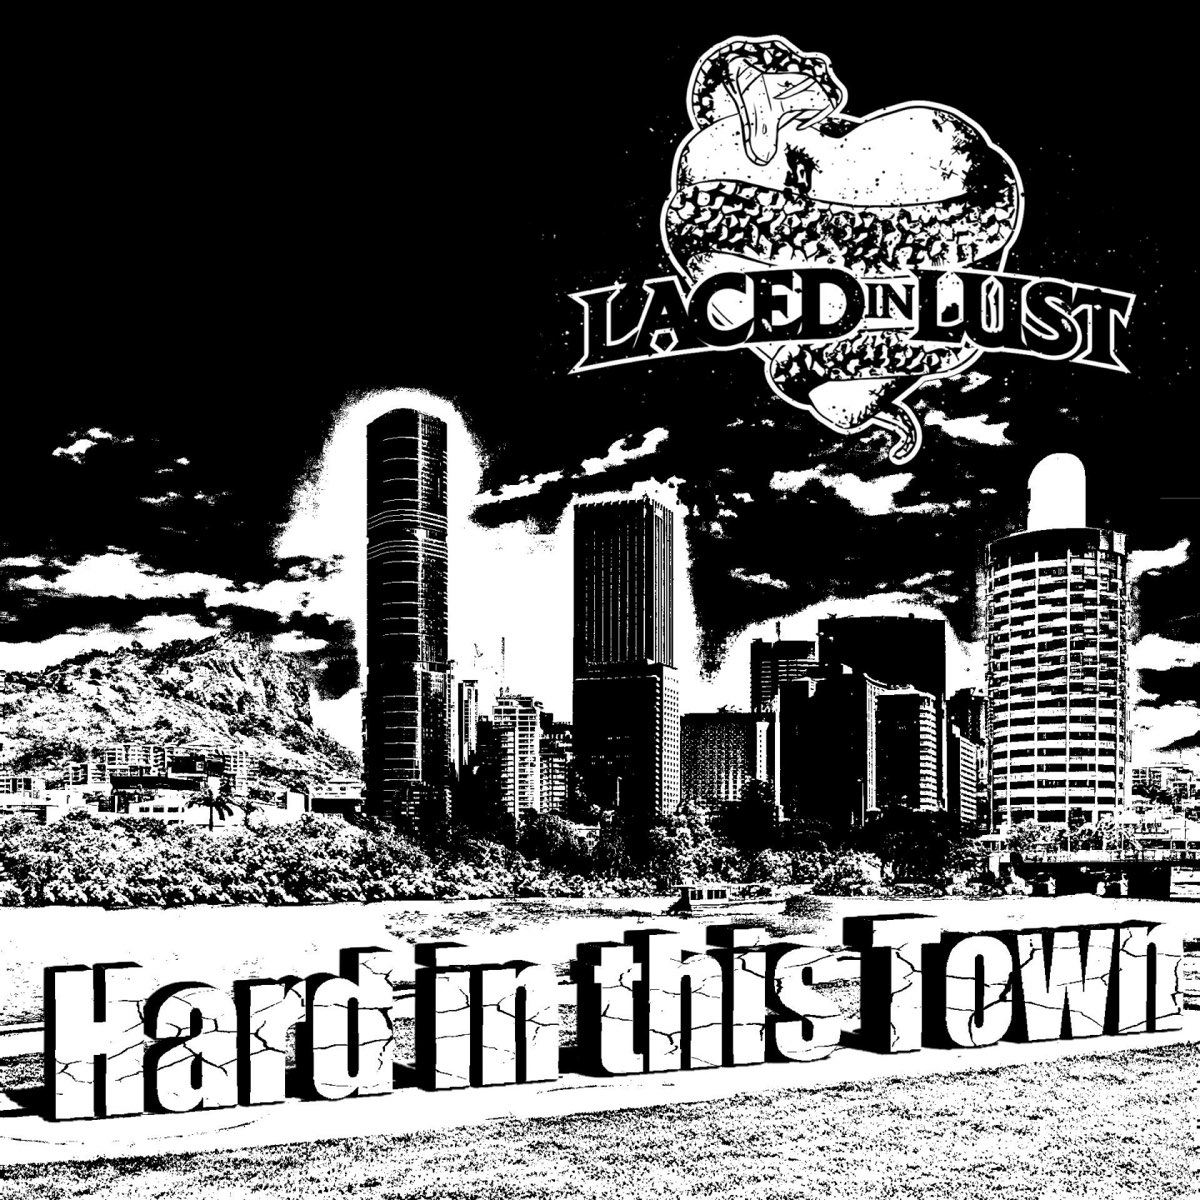 They in this town